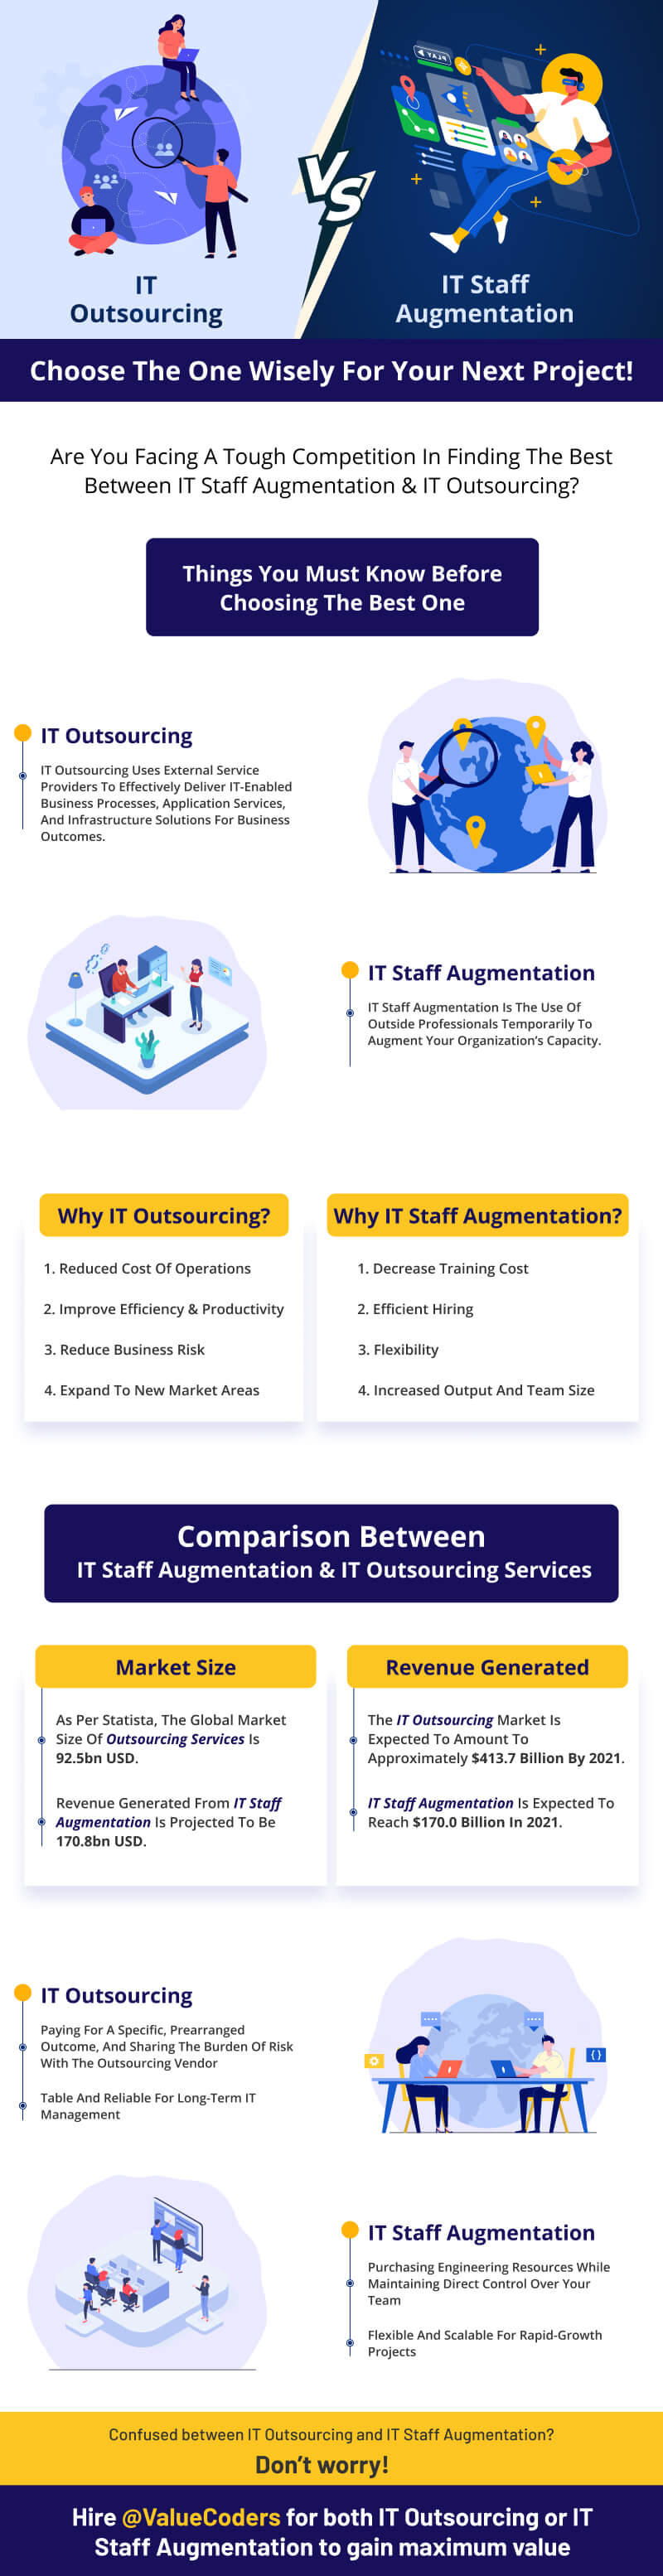 IT Staff Augmentation V/S IT Outsourcing: Which One is Winning the Battle? [Infographic]